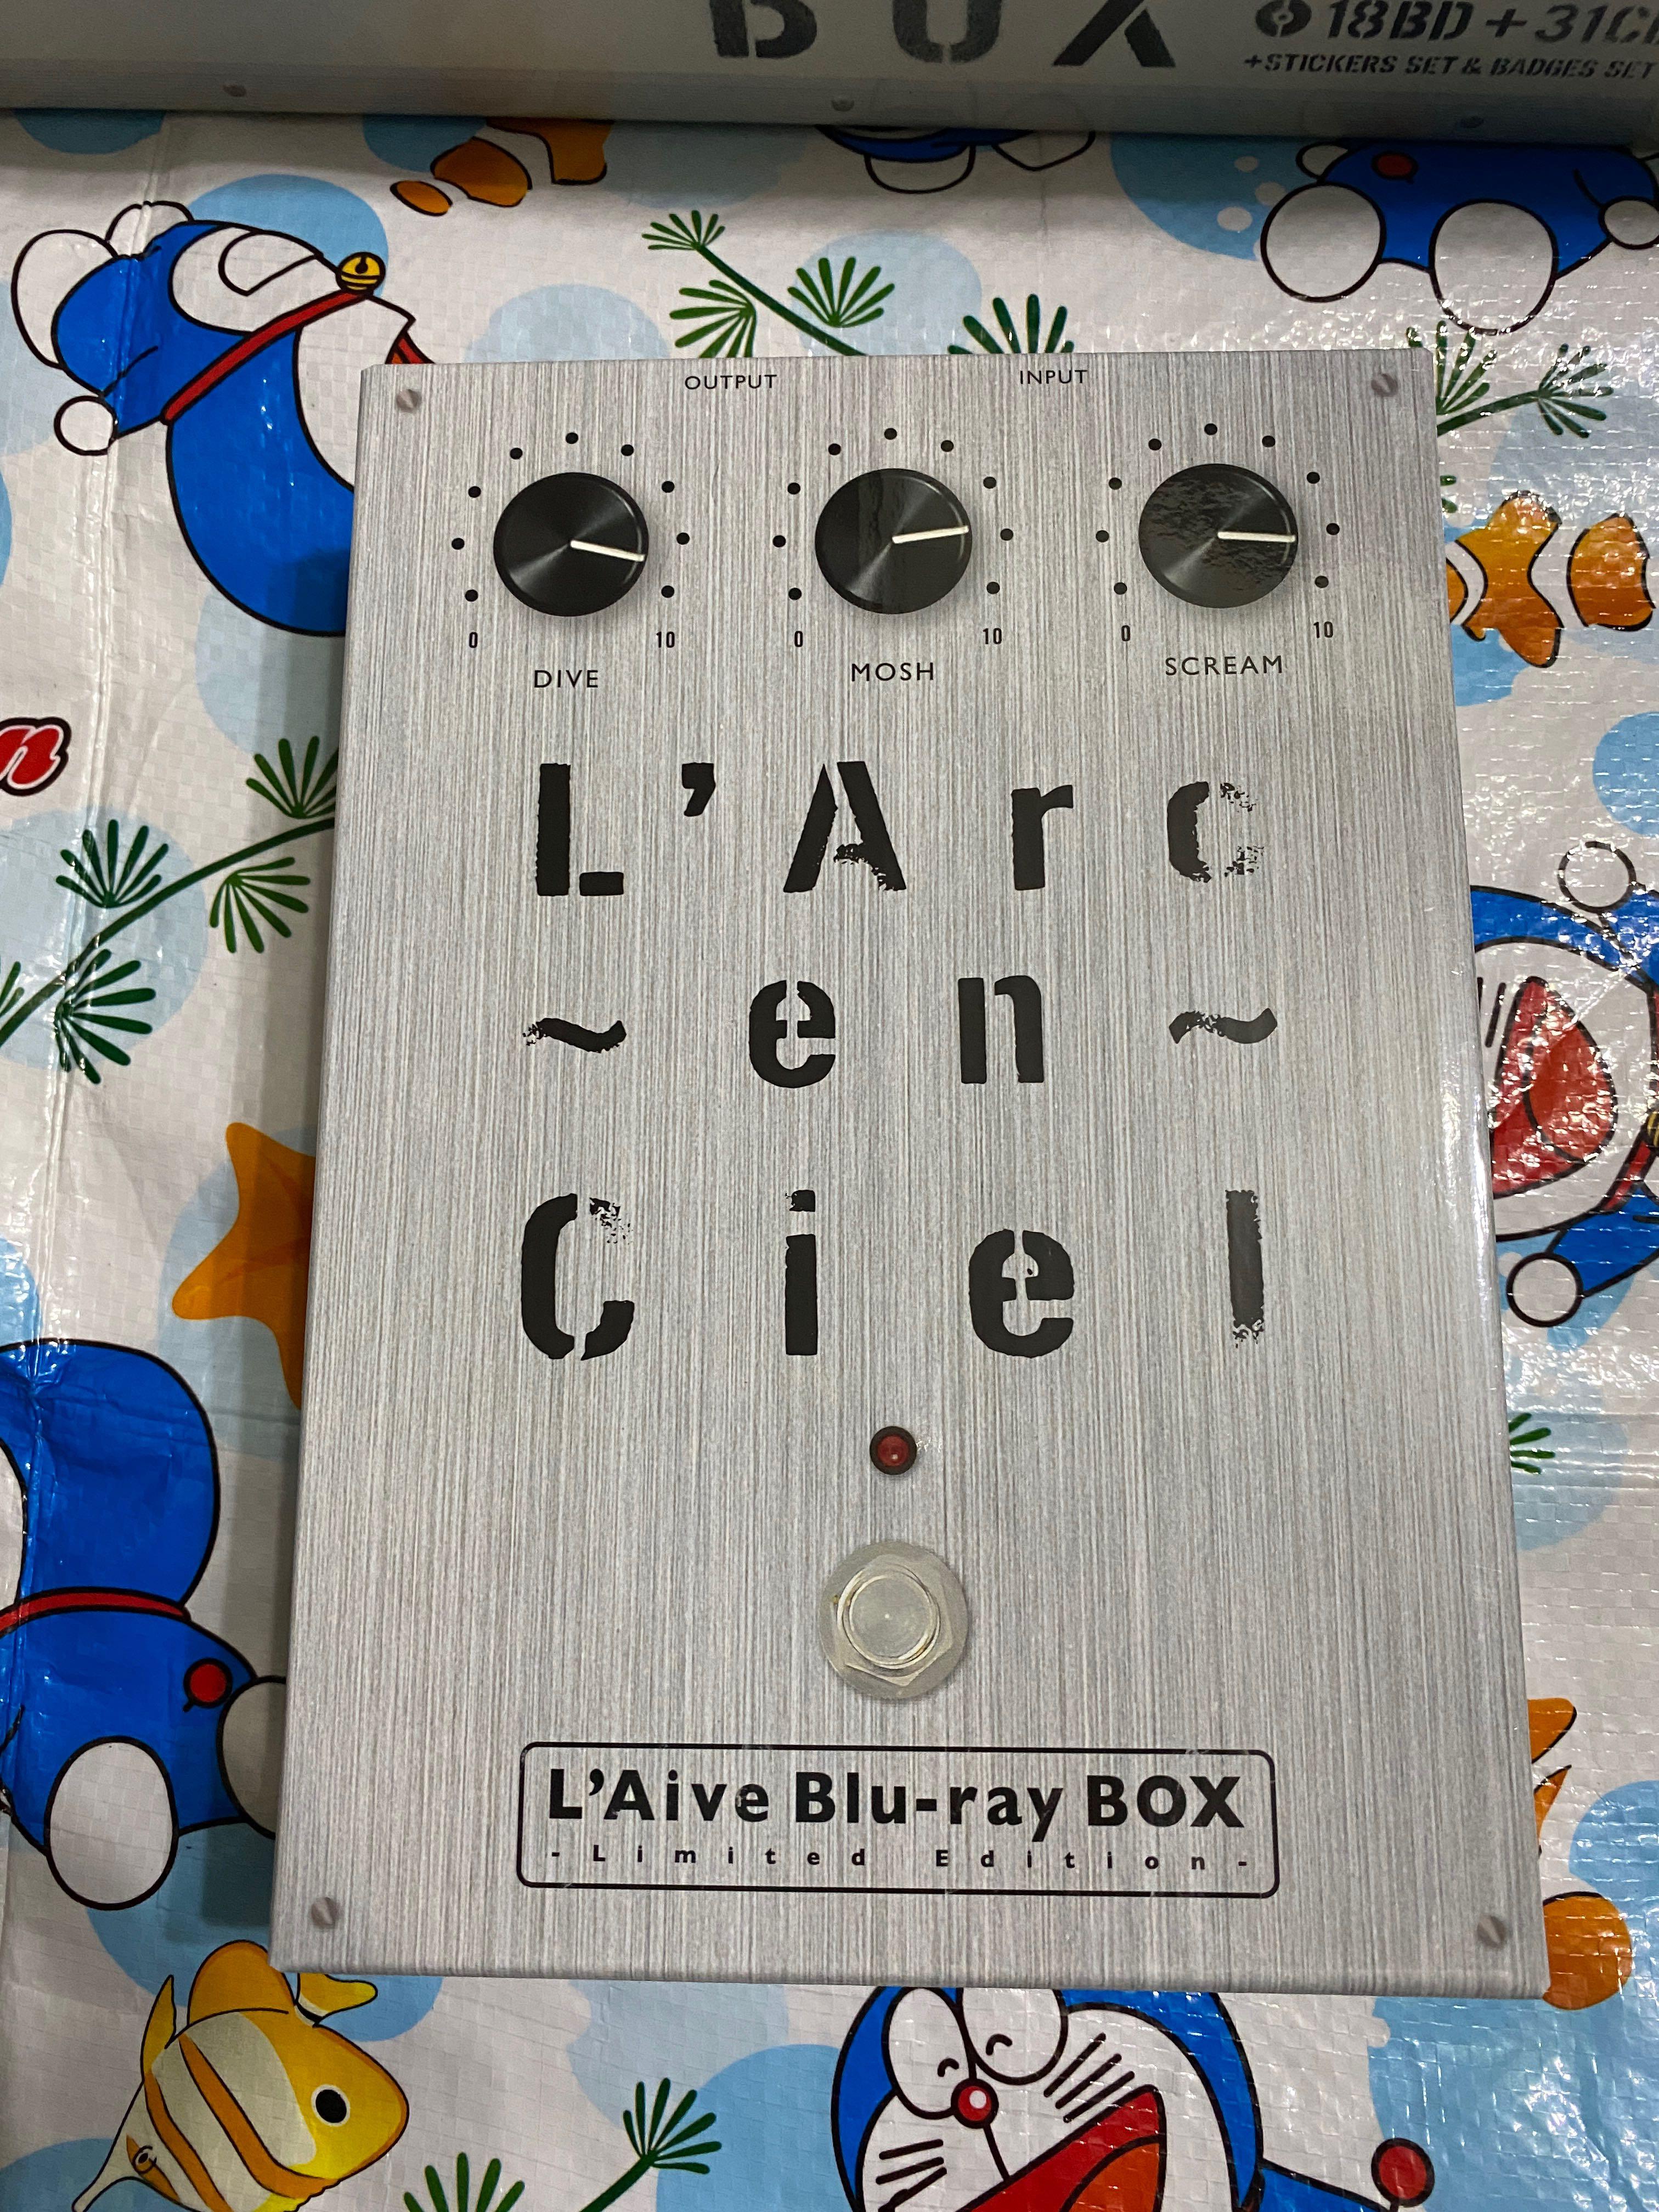 L'Aive Blu-ray BOX-Limited Edition--